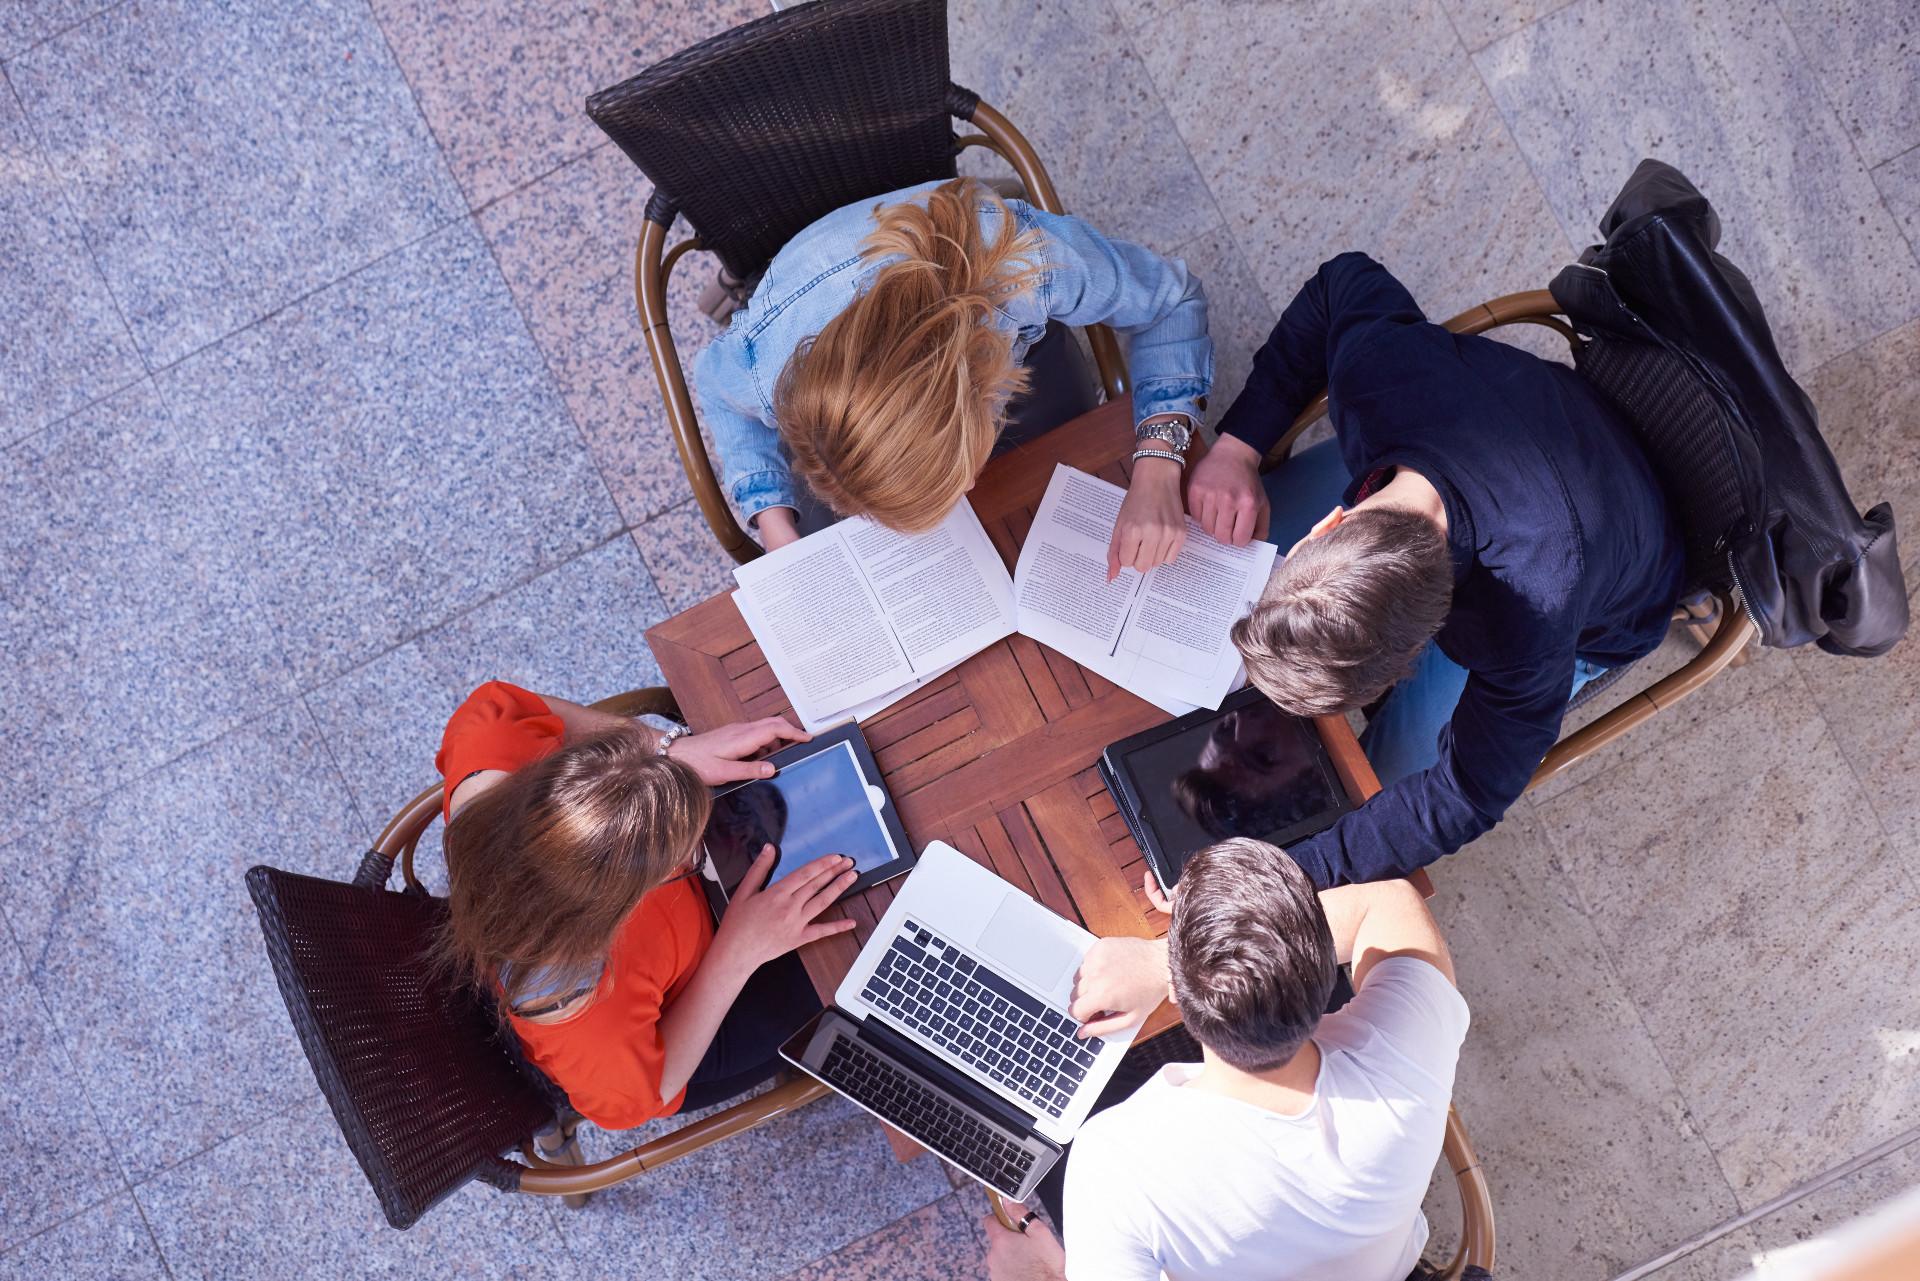 Aerial view of four students studying together